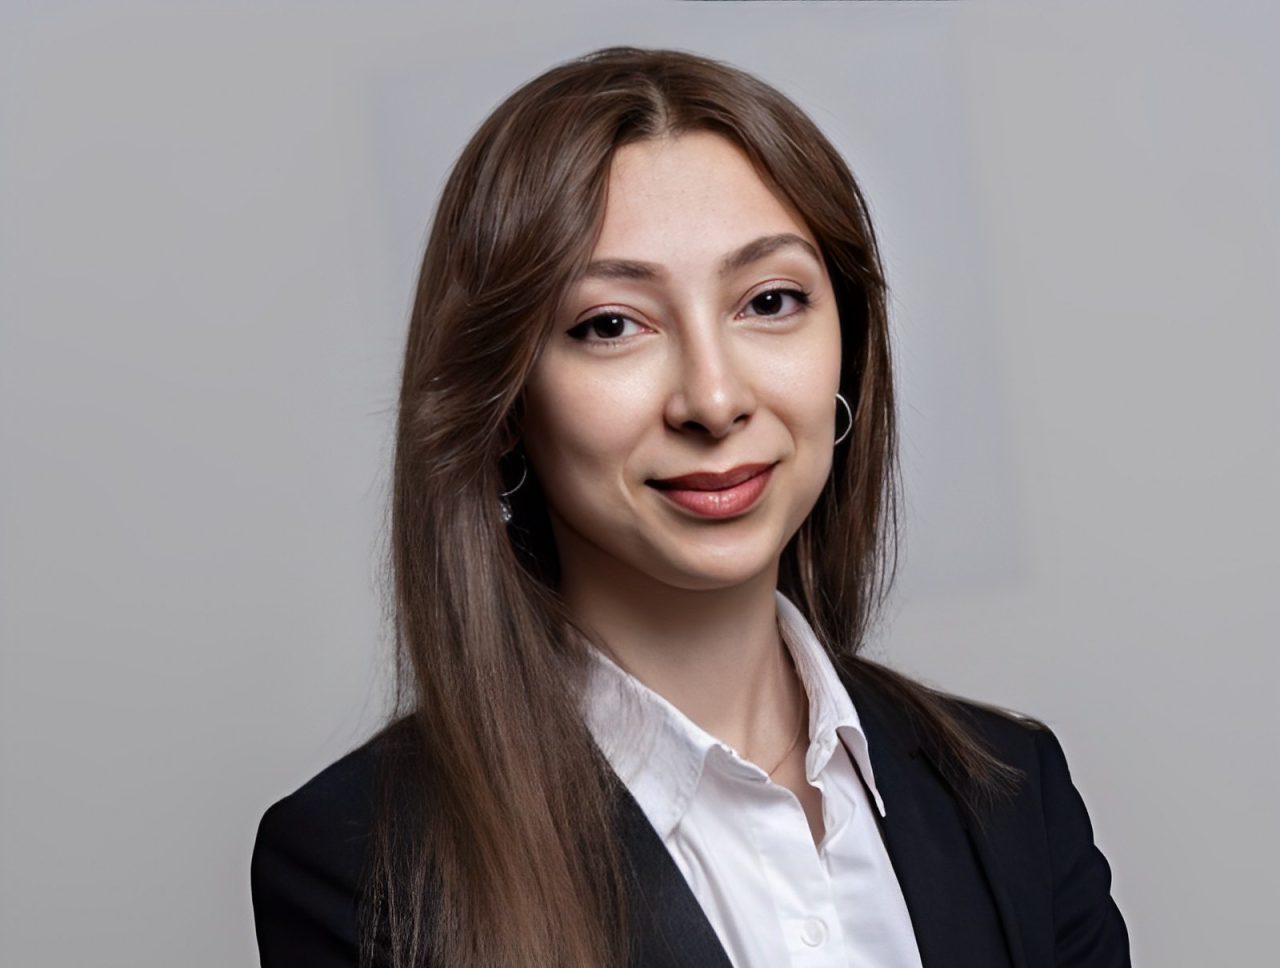 Jemma Arakelyan: As an oncologist, I have seen the remarkable potential of natural products and their significant impact on our daily practice.